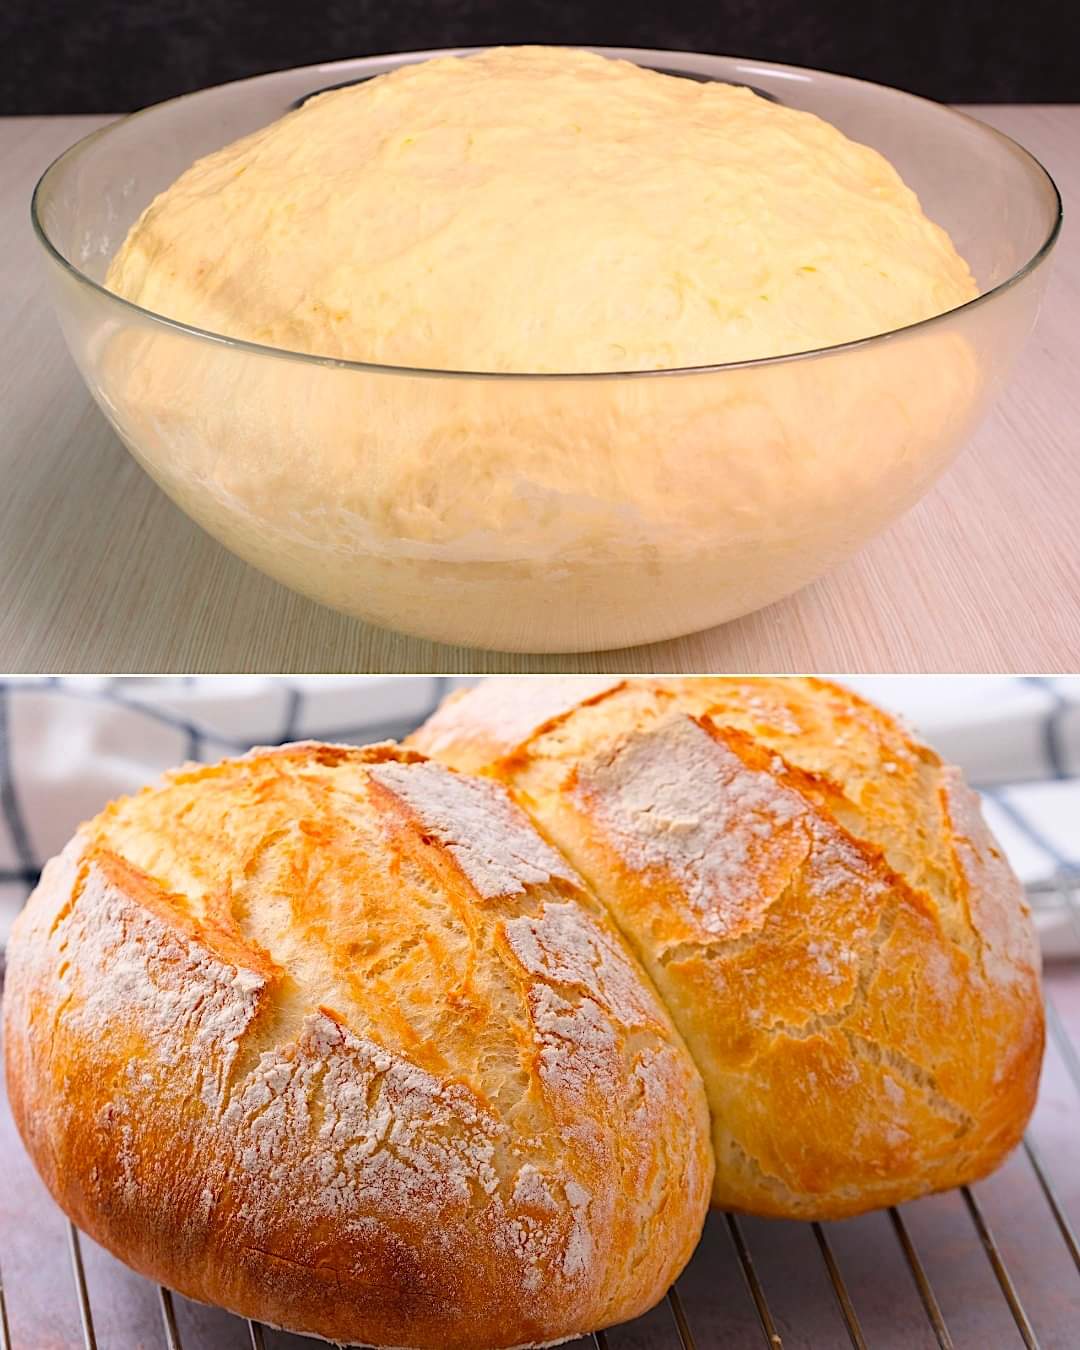 HOW TO MAKE EASY BREAD AT HOME